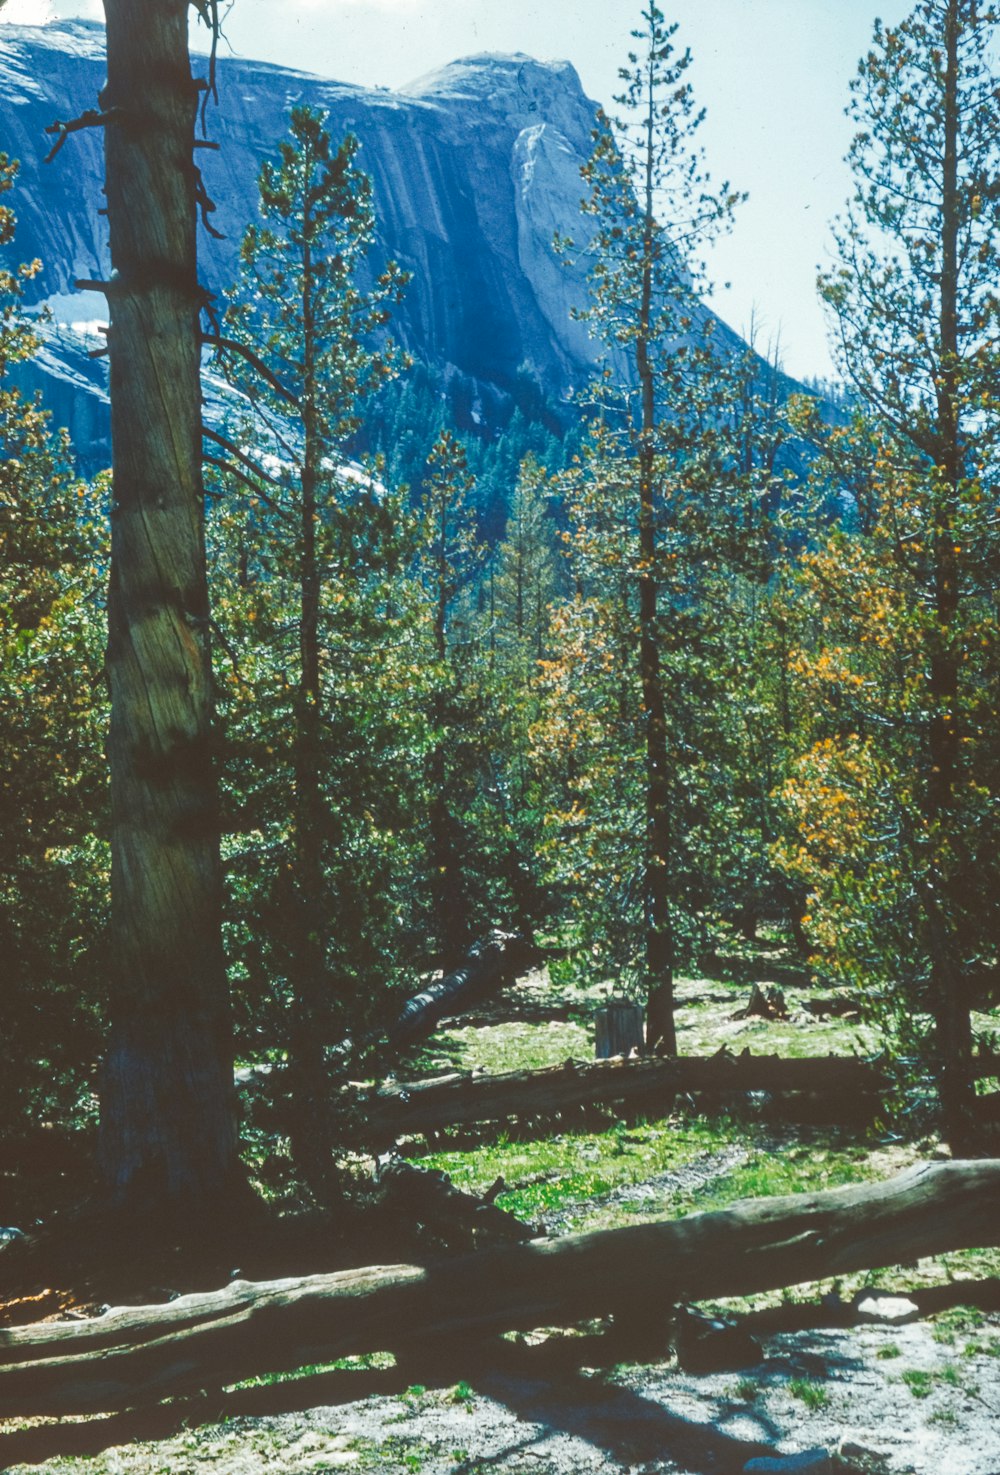 a group of trees in a forest with a mountain in the background